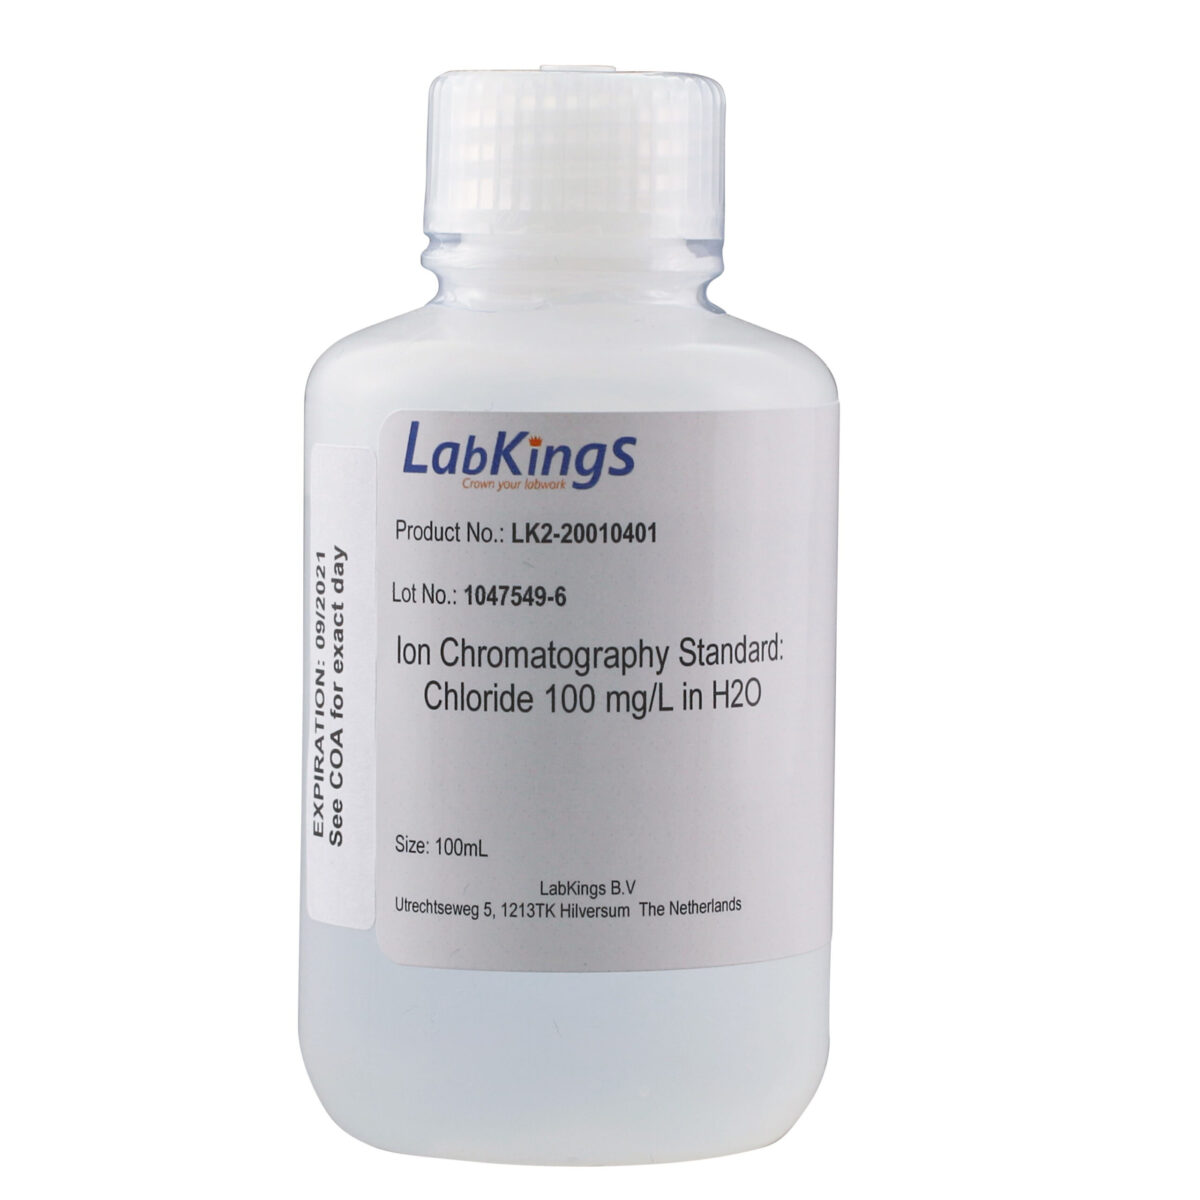 Chloride, 100 mg/L, Ion Chromatography Standard, in H2O, 100mL